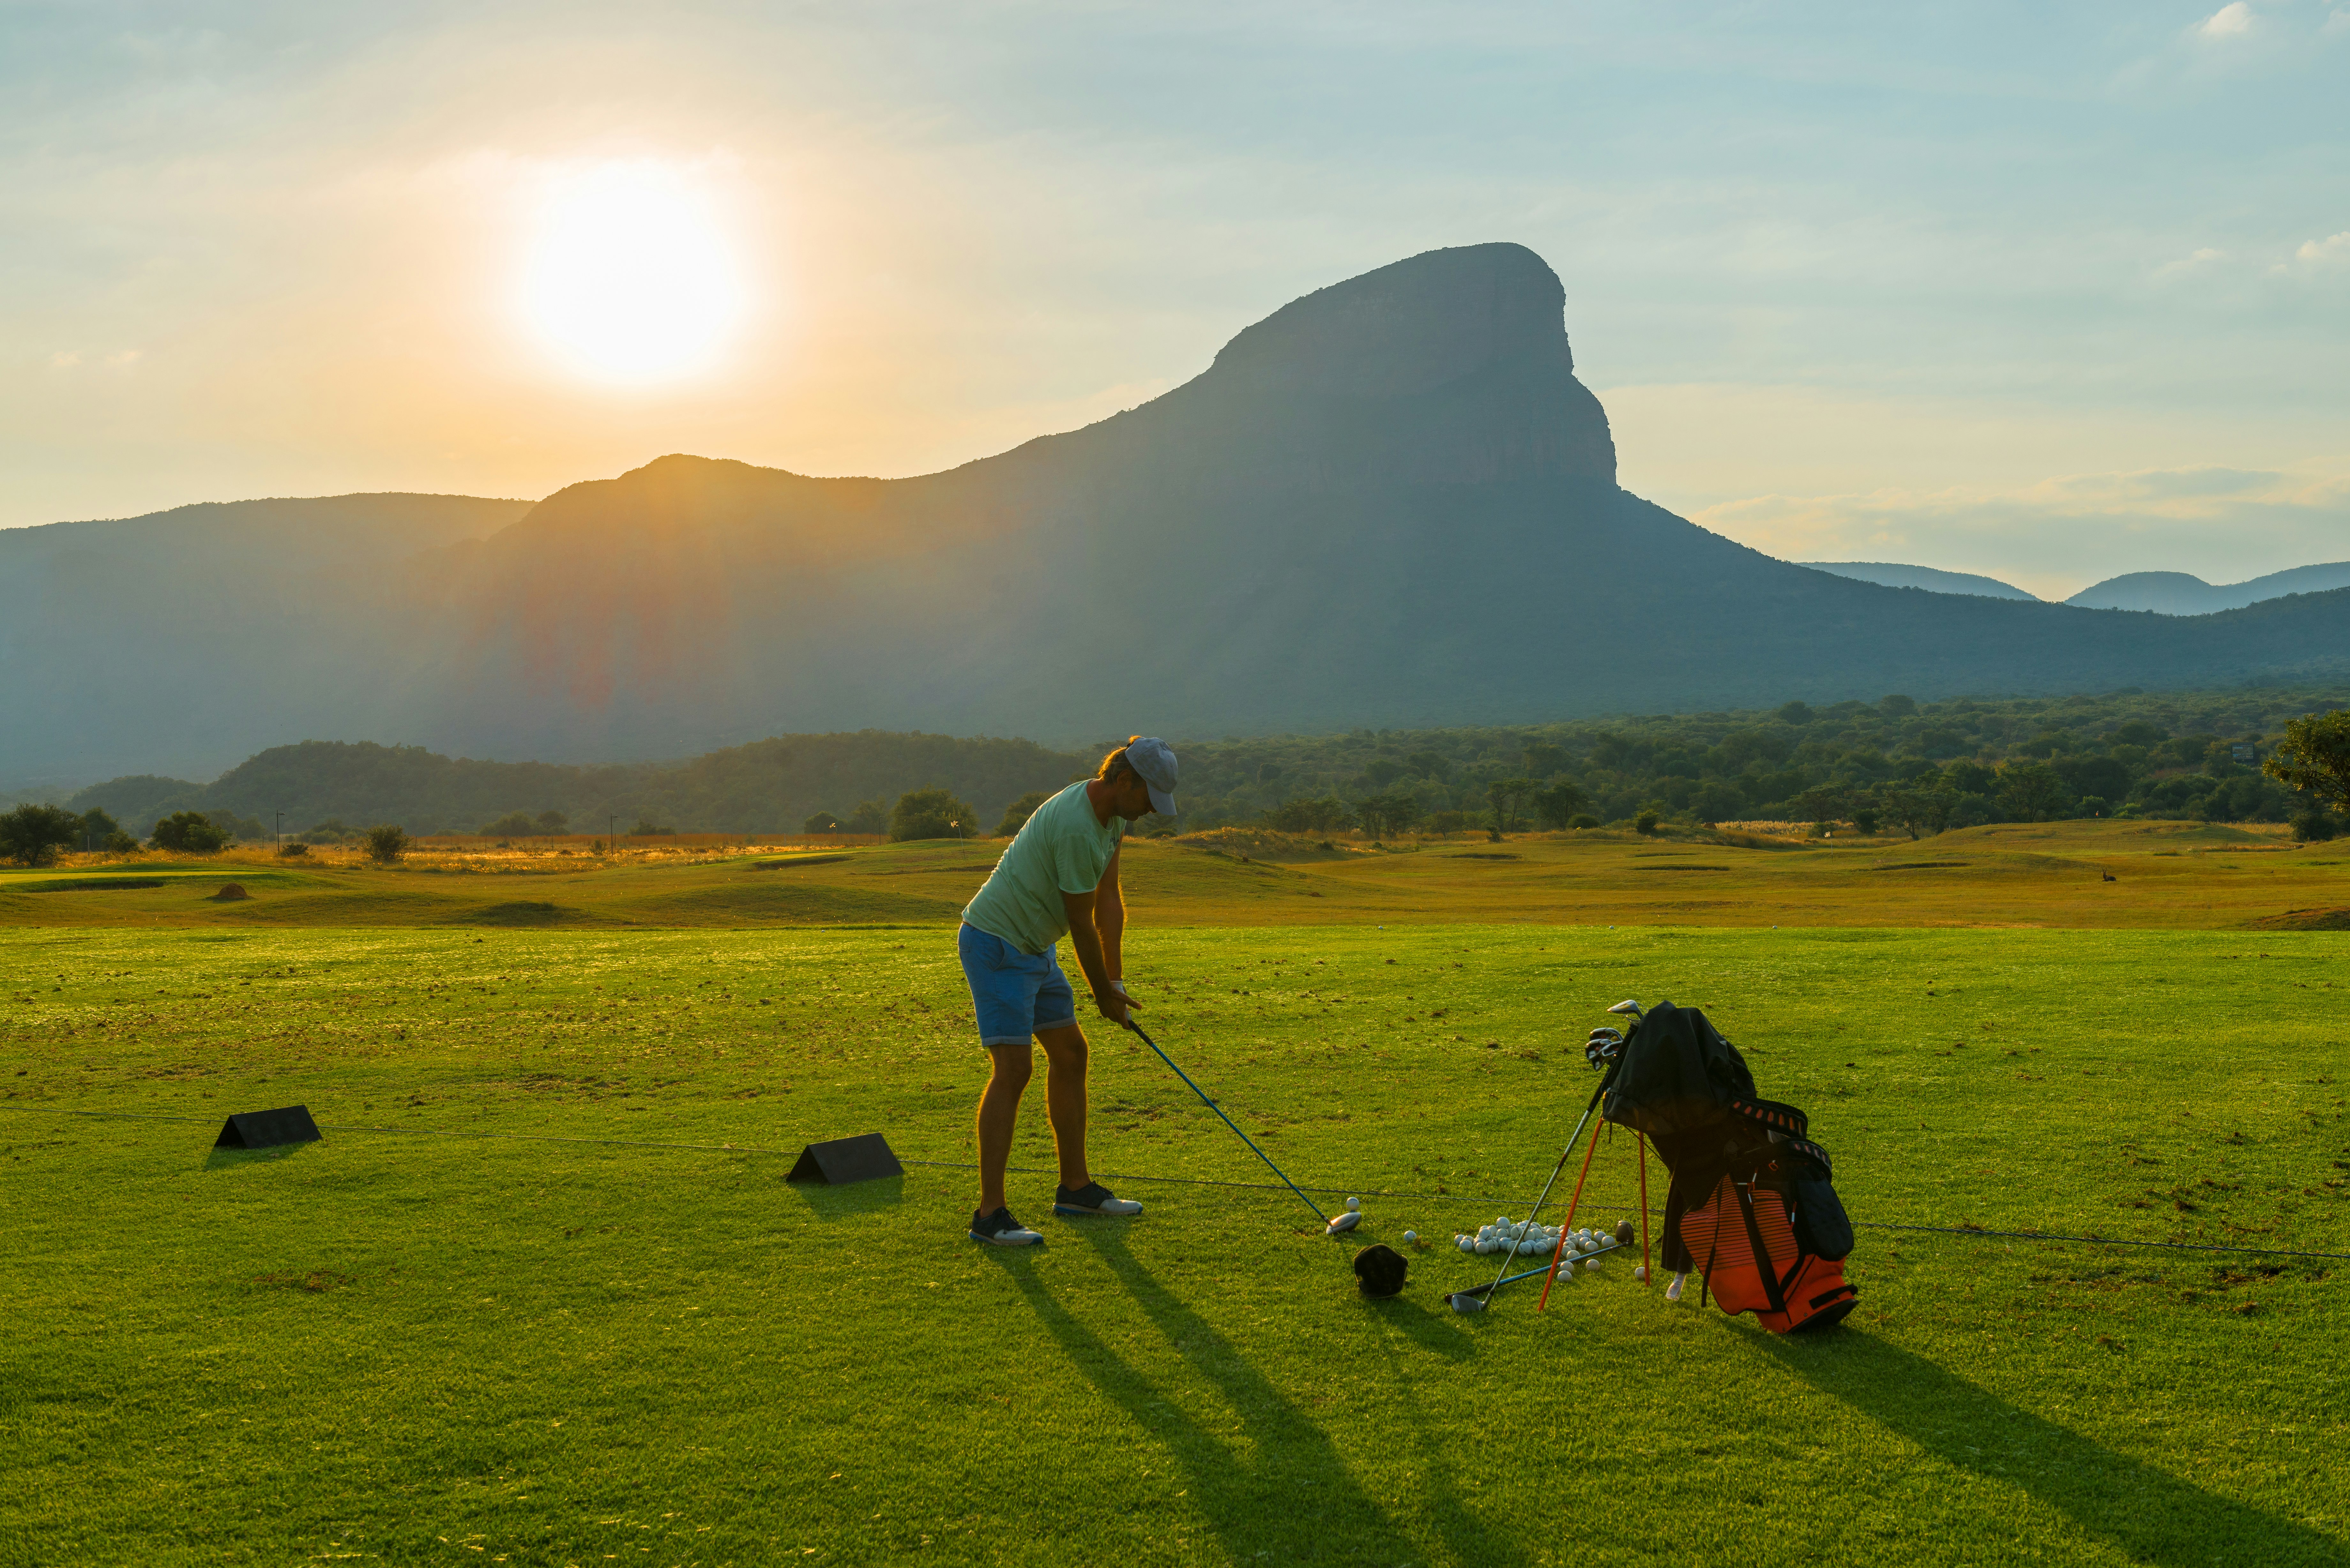 A young male caucasian adult playing golf inside the Entabeni Game Reserve at sunset with a view over the Hanglip or Hanging Lip mountain peak